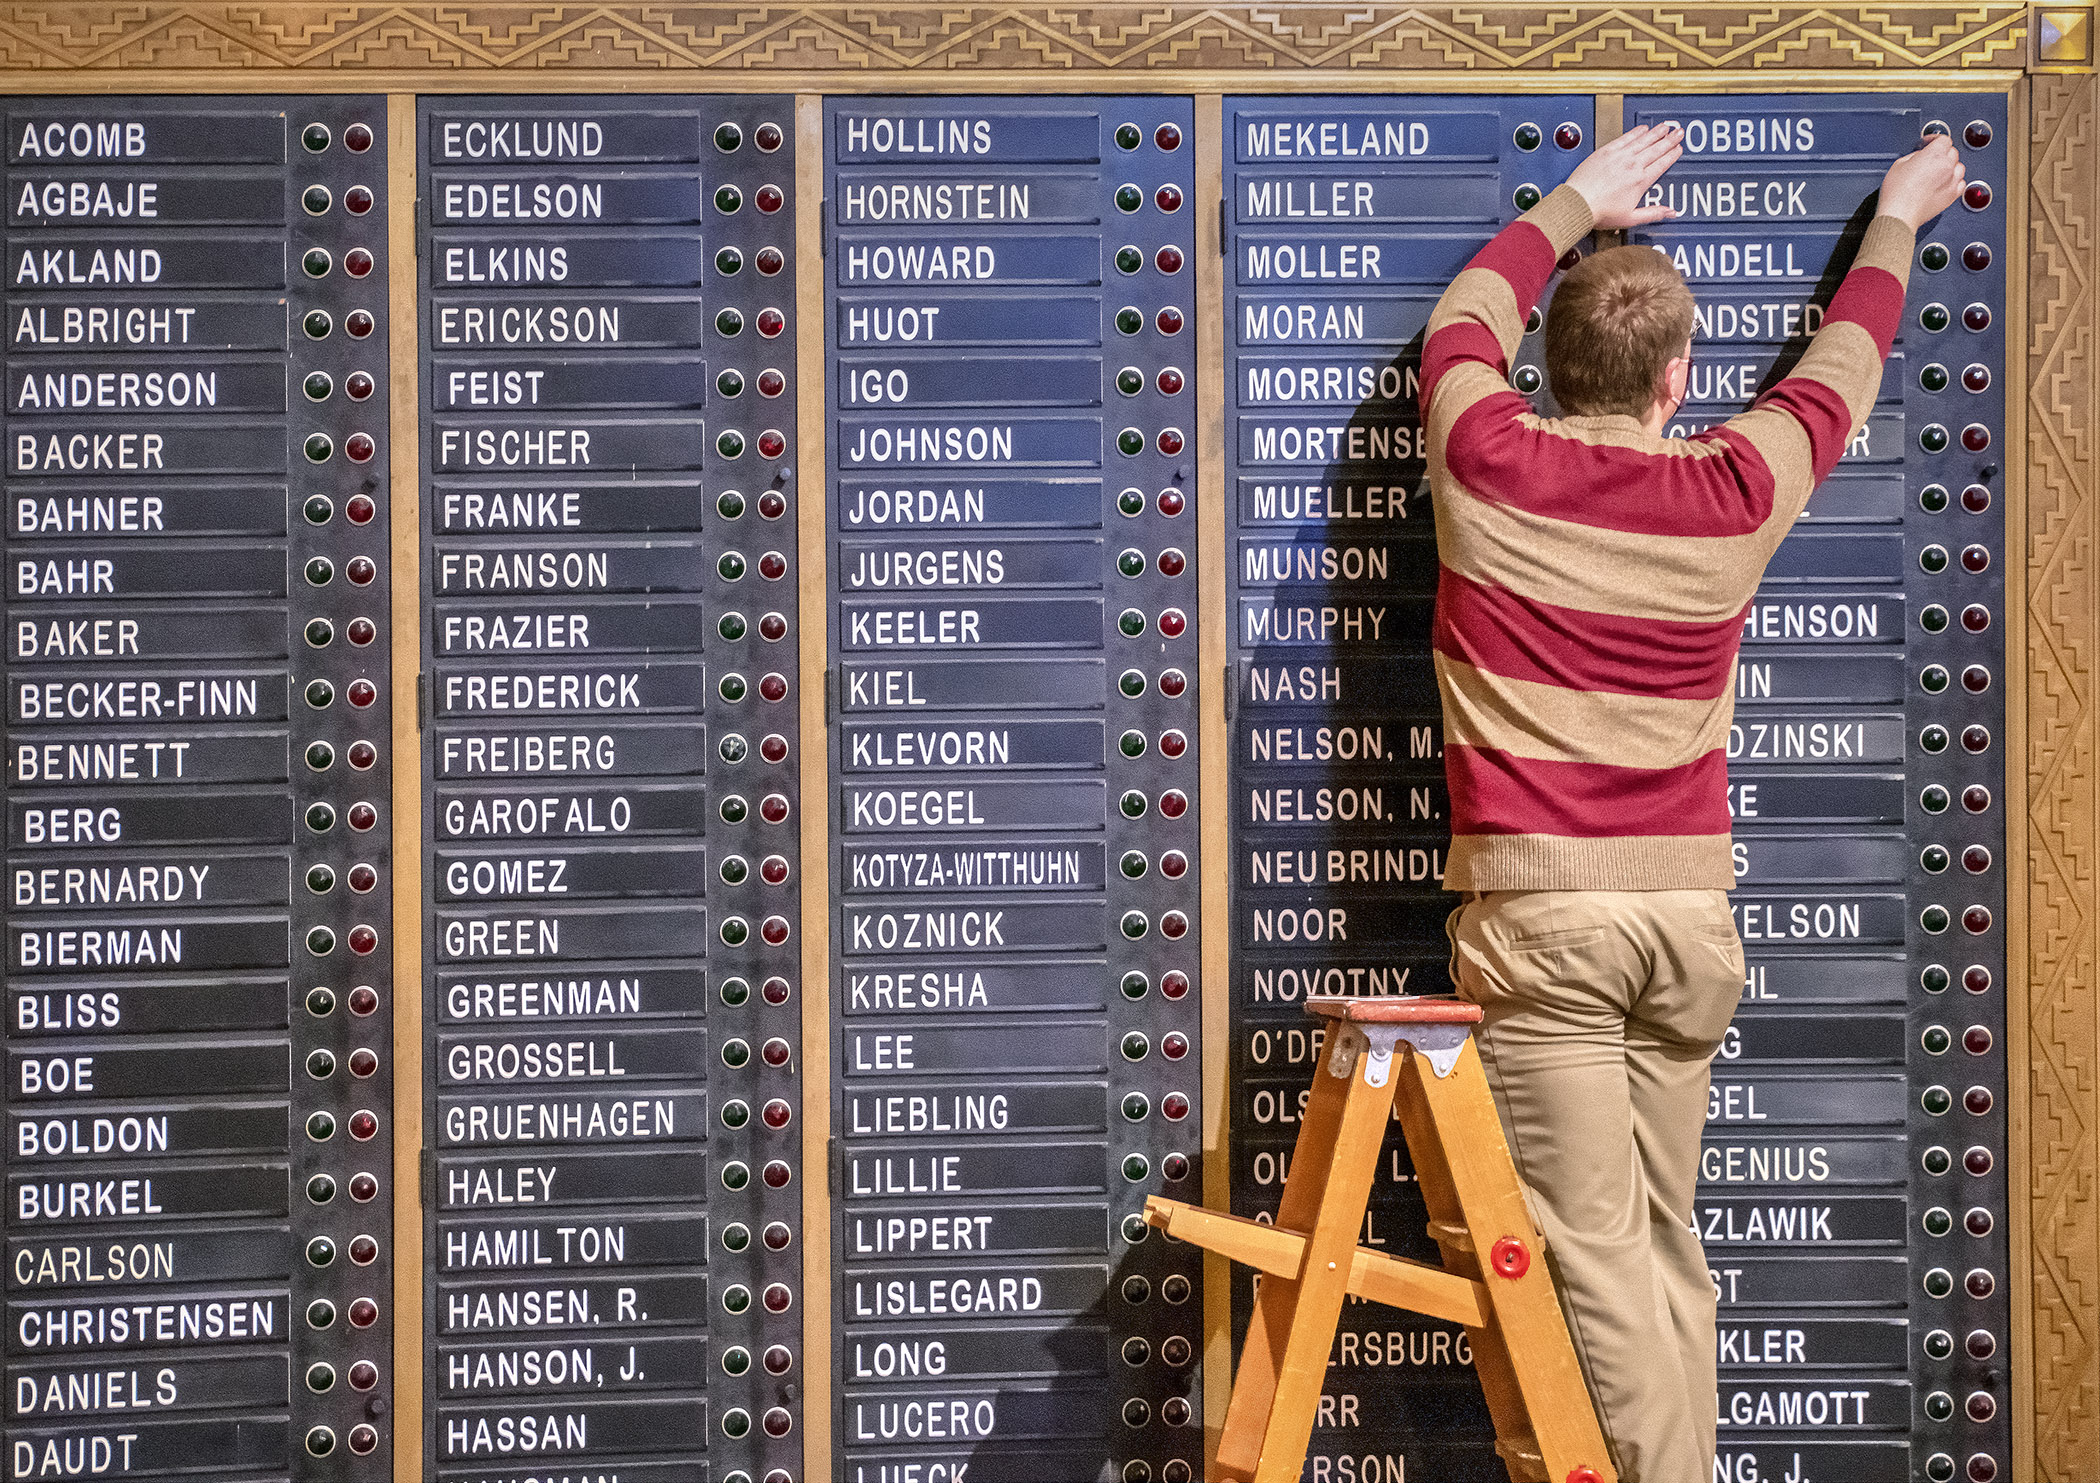 Travis Roline, administrative assistant for the Chief Clerk’s Office, adjusts nameplates on the House voting board Dec. 29 in preparation for the start of the 2021 legislative session. Photo by Andrew VonBank